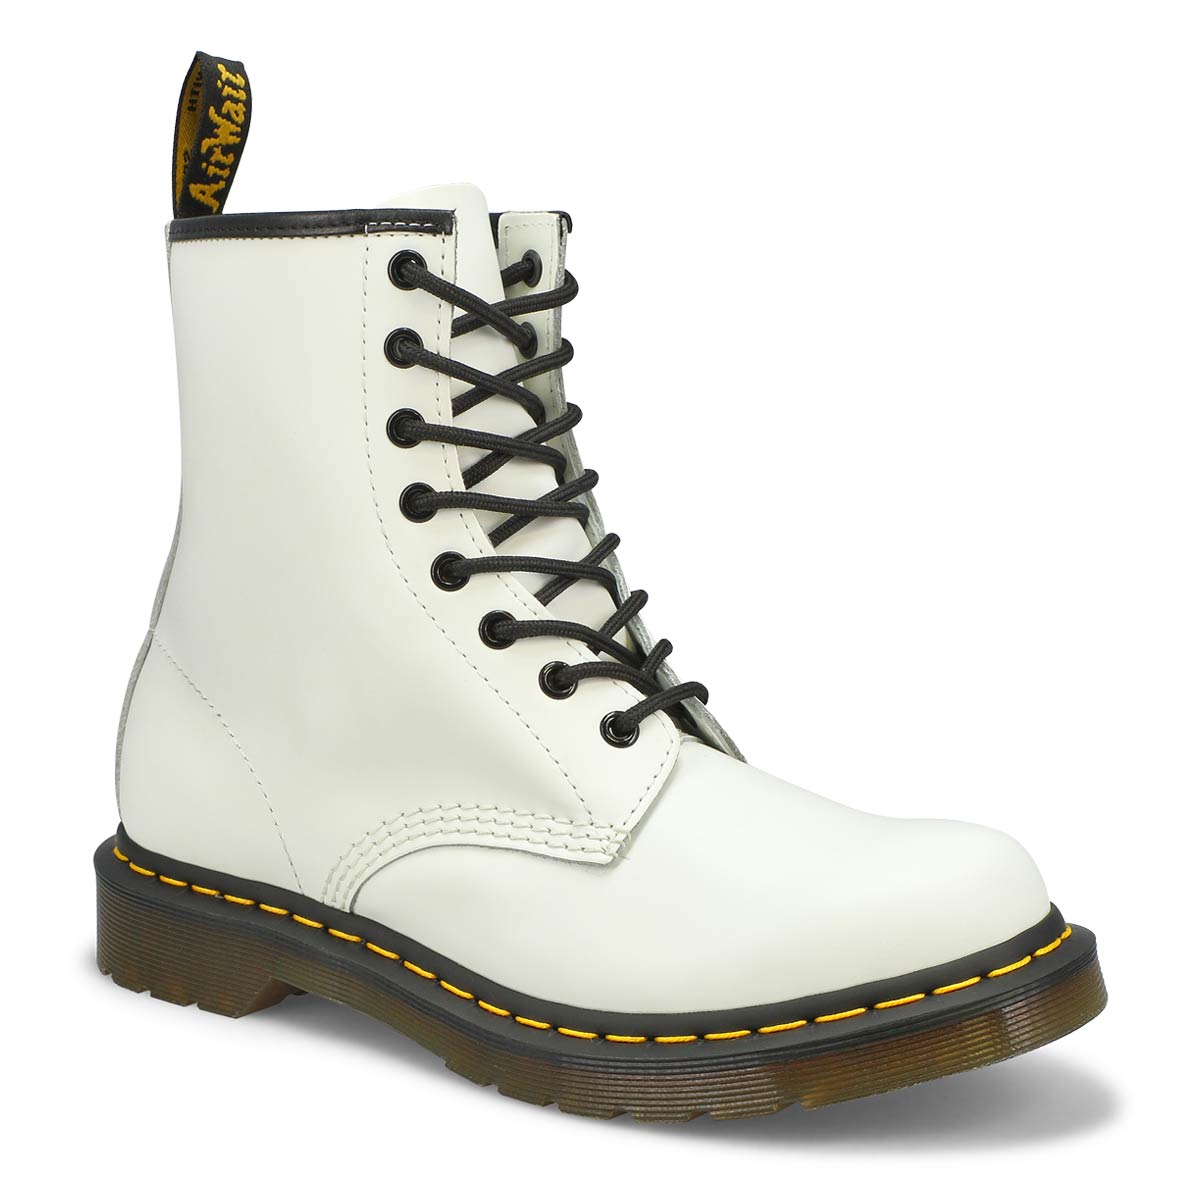 Dr Martens Ladies 1460 8 Eye Smooth Boot - Wh | SoftMoc.com